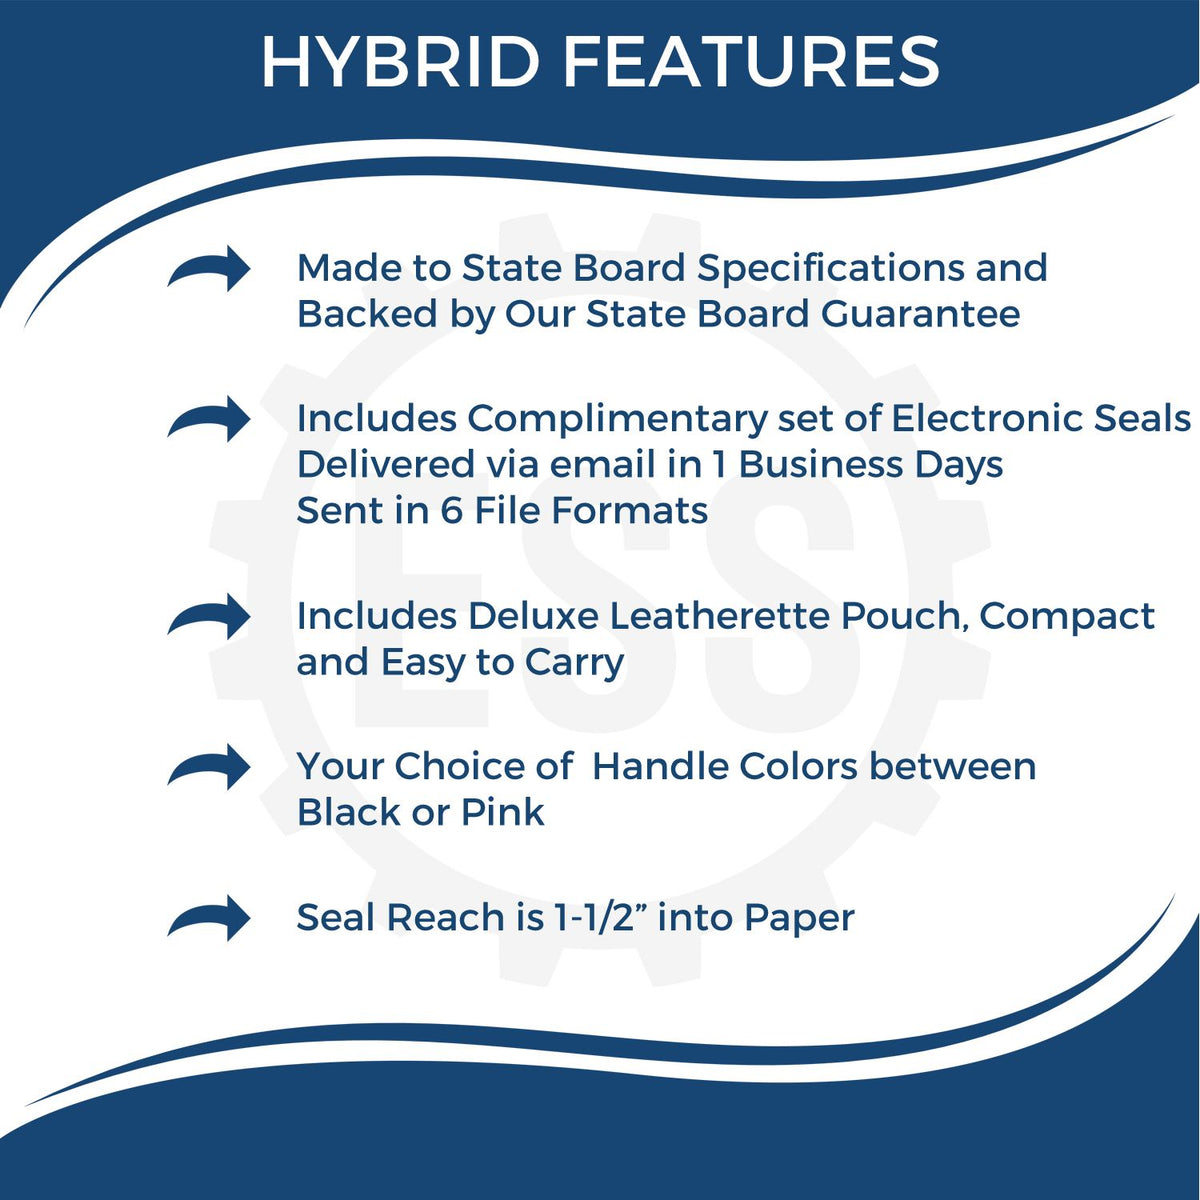 A picture of an infographic highlighting the selling points for the Hybrid Illinois Architect Seal